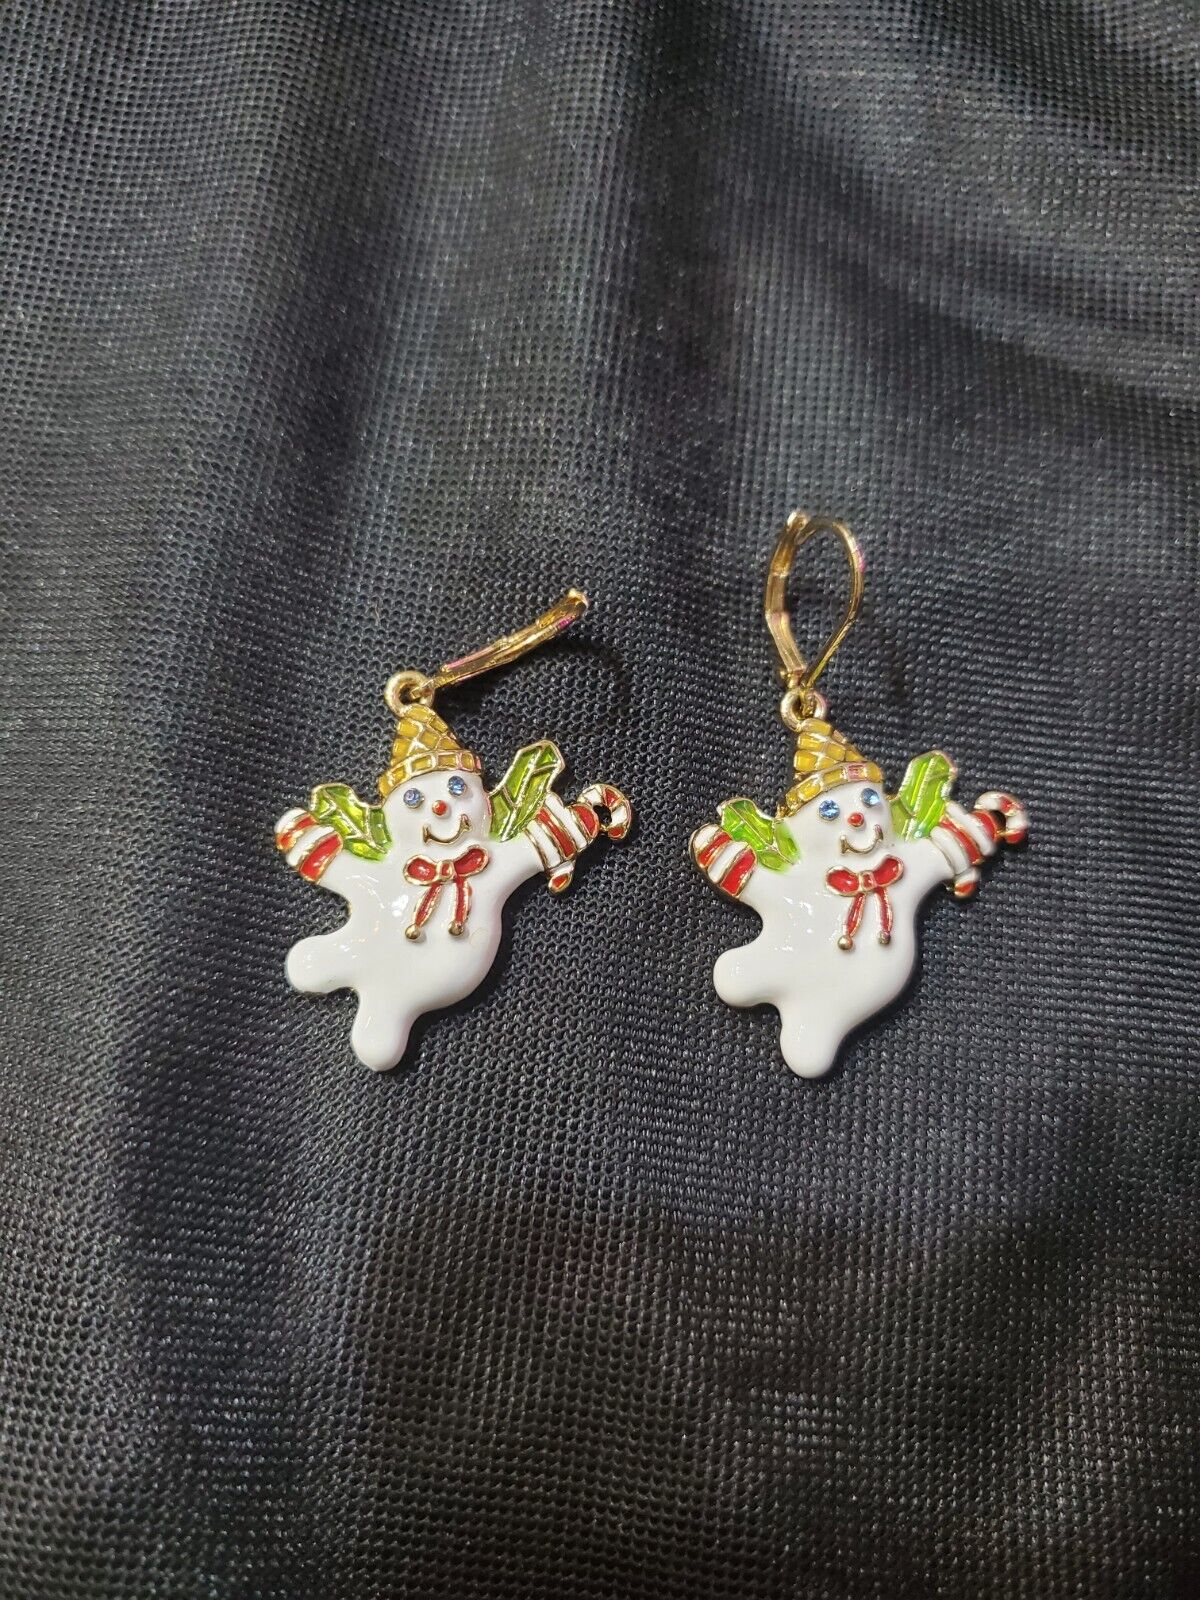 Authentic Mr. Bingle  Earrings Iconic Snowman, New Orleans